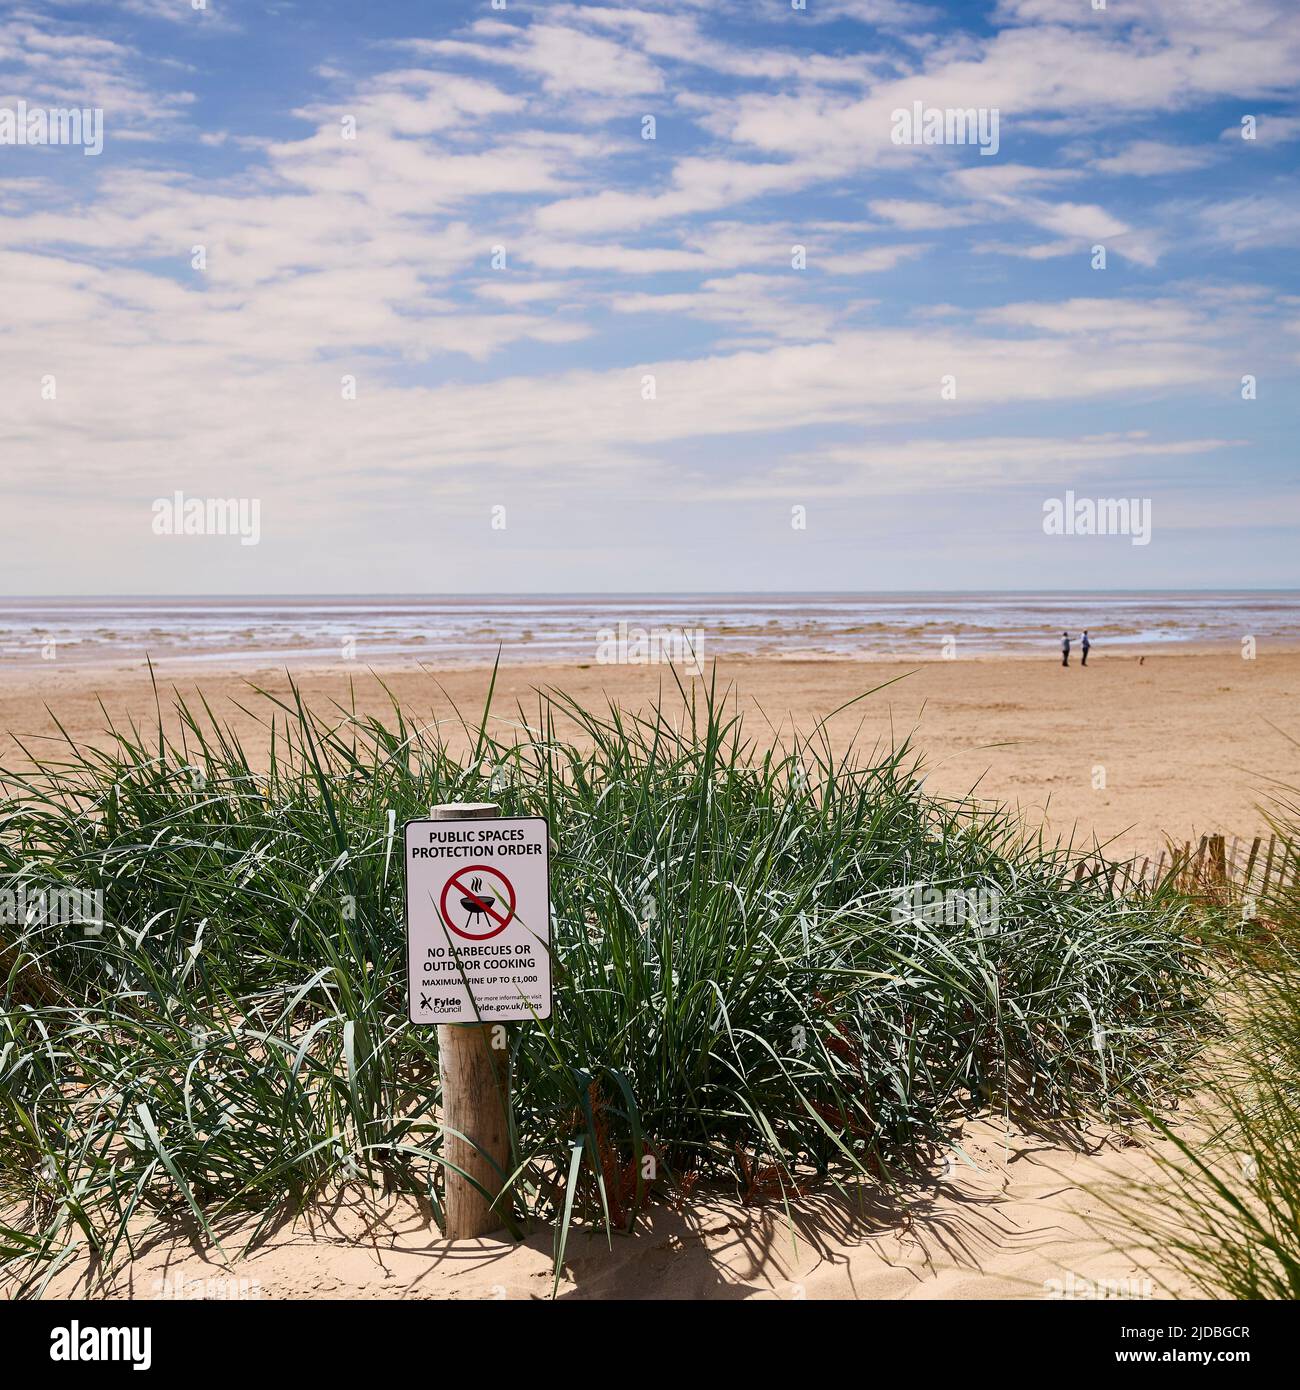 Public spaces protection order on the beach at Lytham St Annes,UK Stock Photo